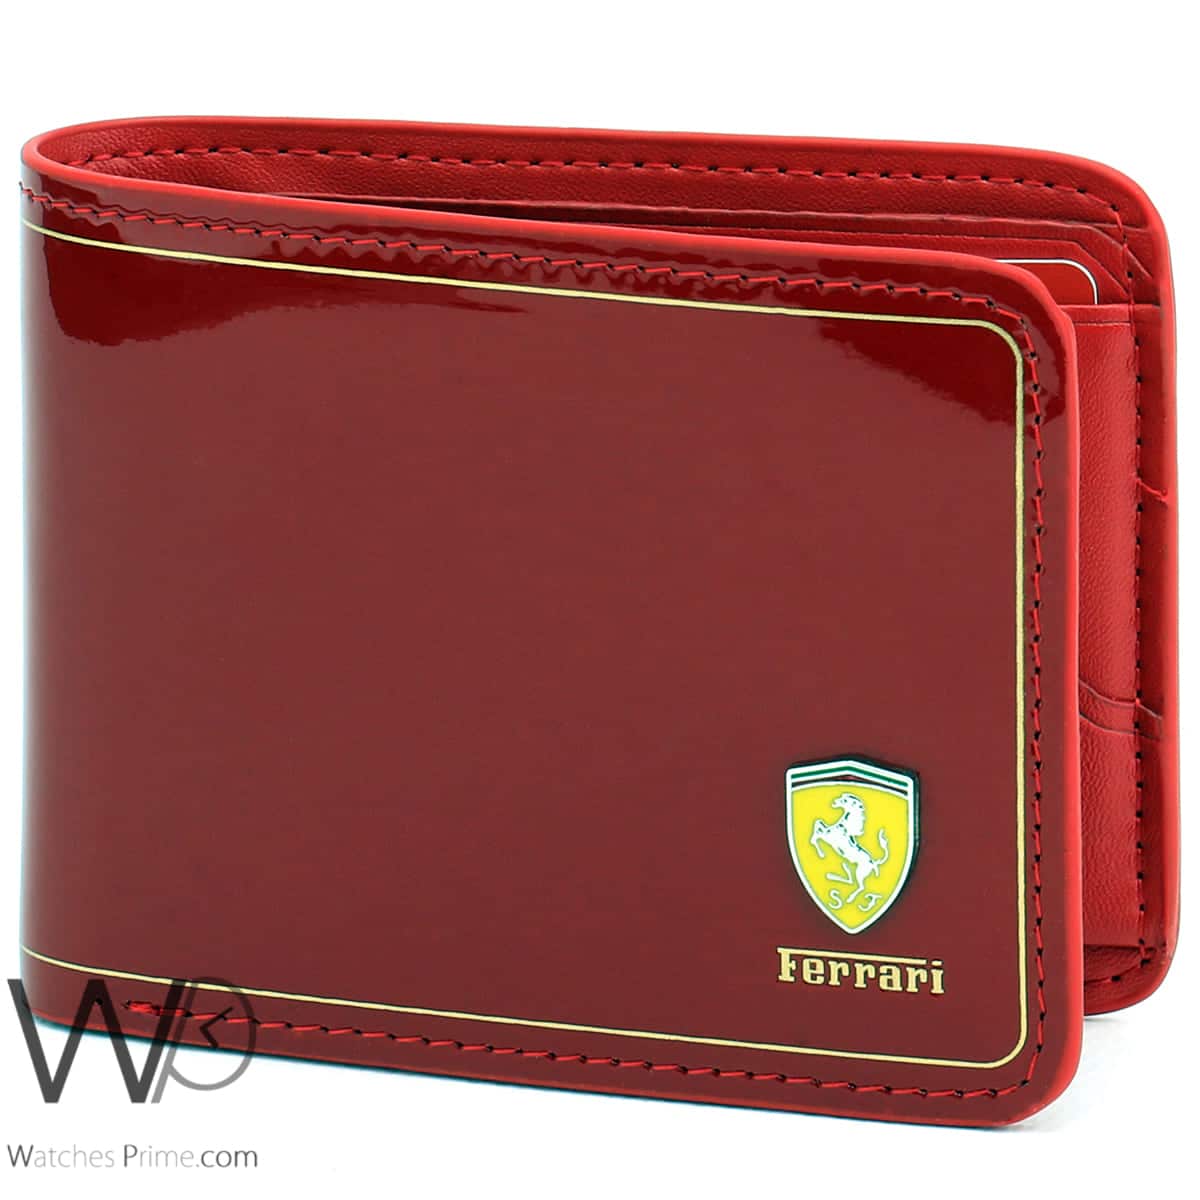 Ferrari Men's Red Leather Wallet | Watches Prime